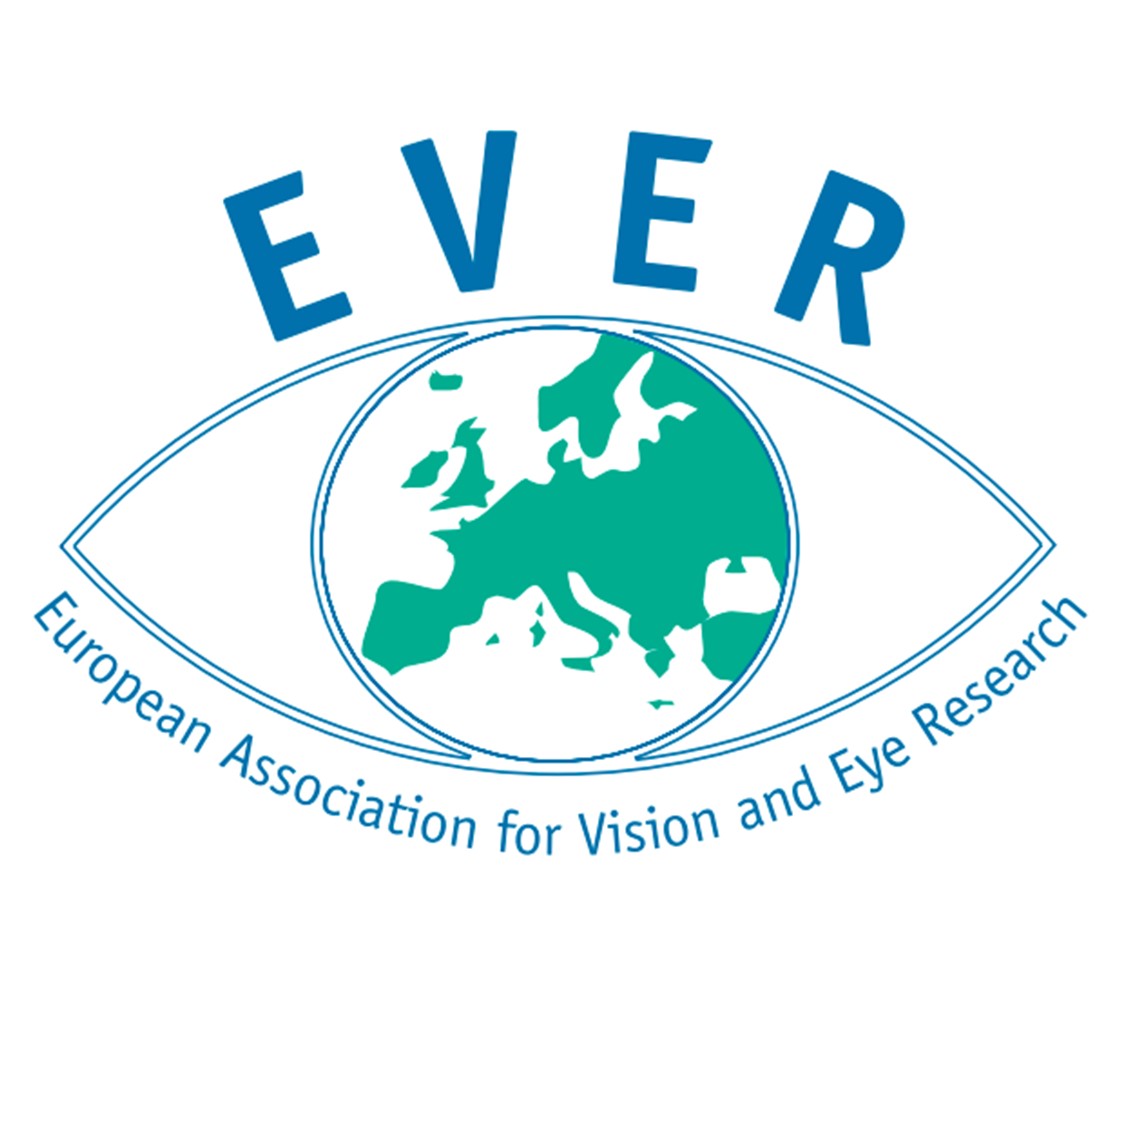 European Association for Vision and Eye Research